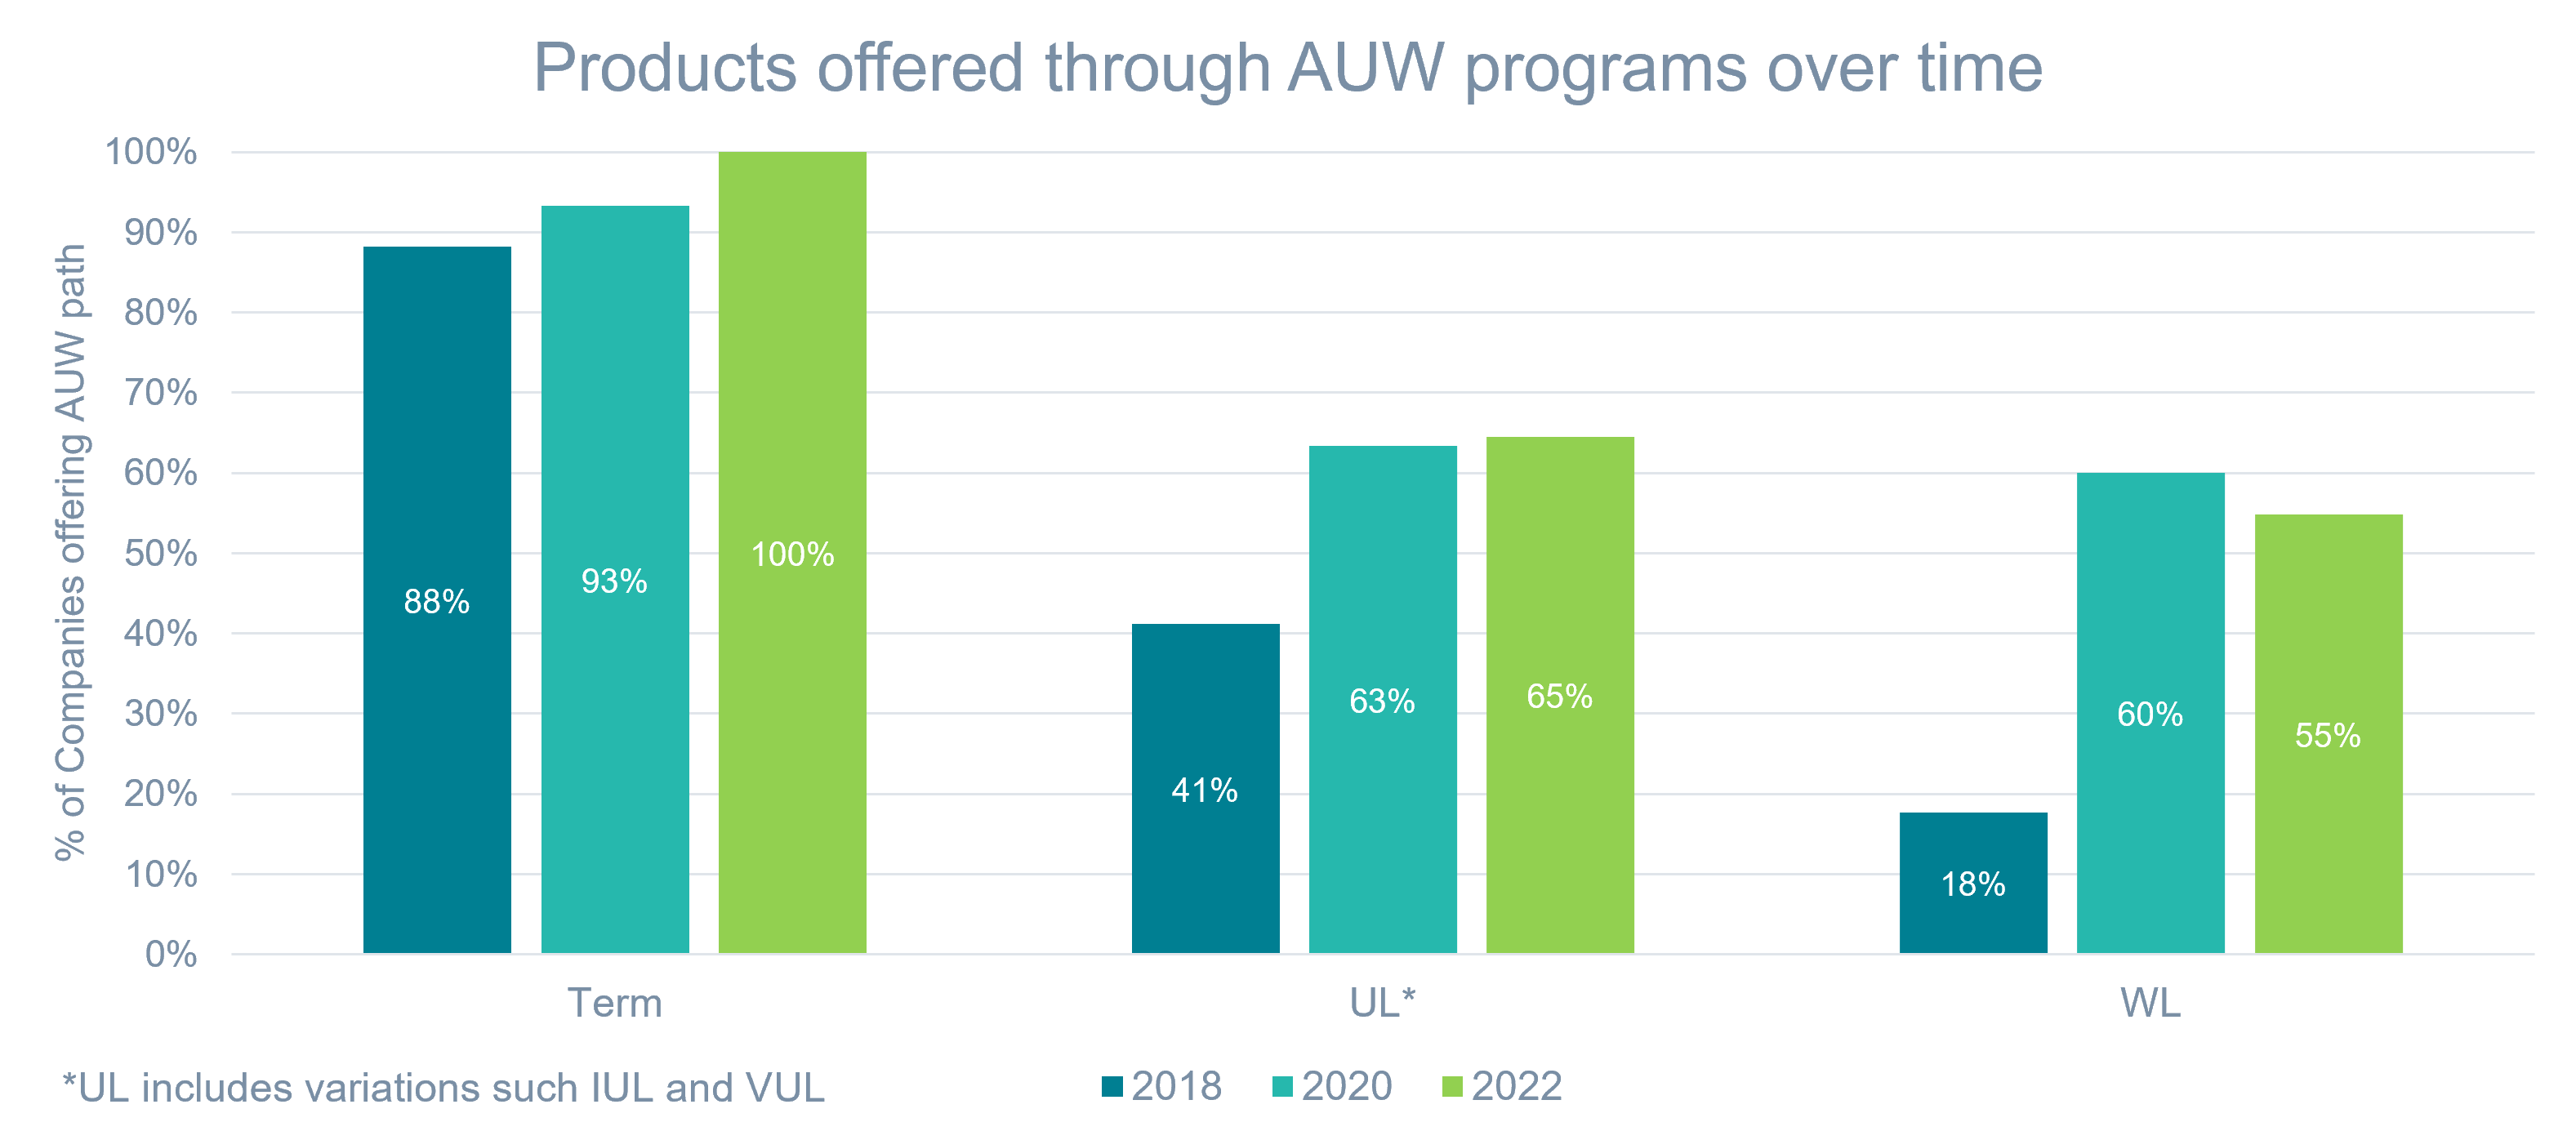 Figure 2: Product Types Offered Through AUW Programs Over Time